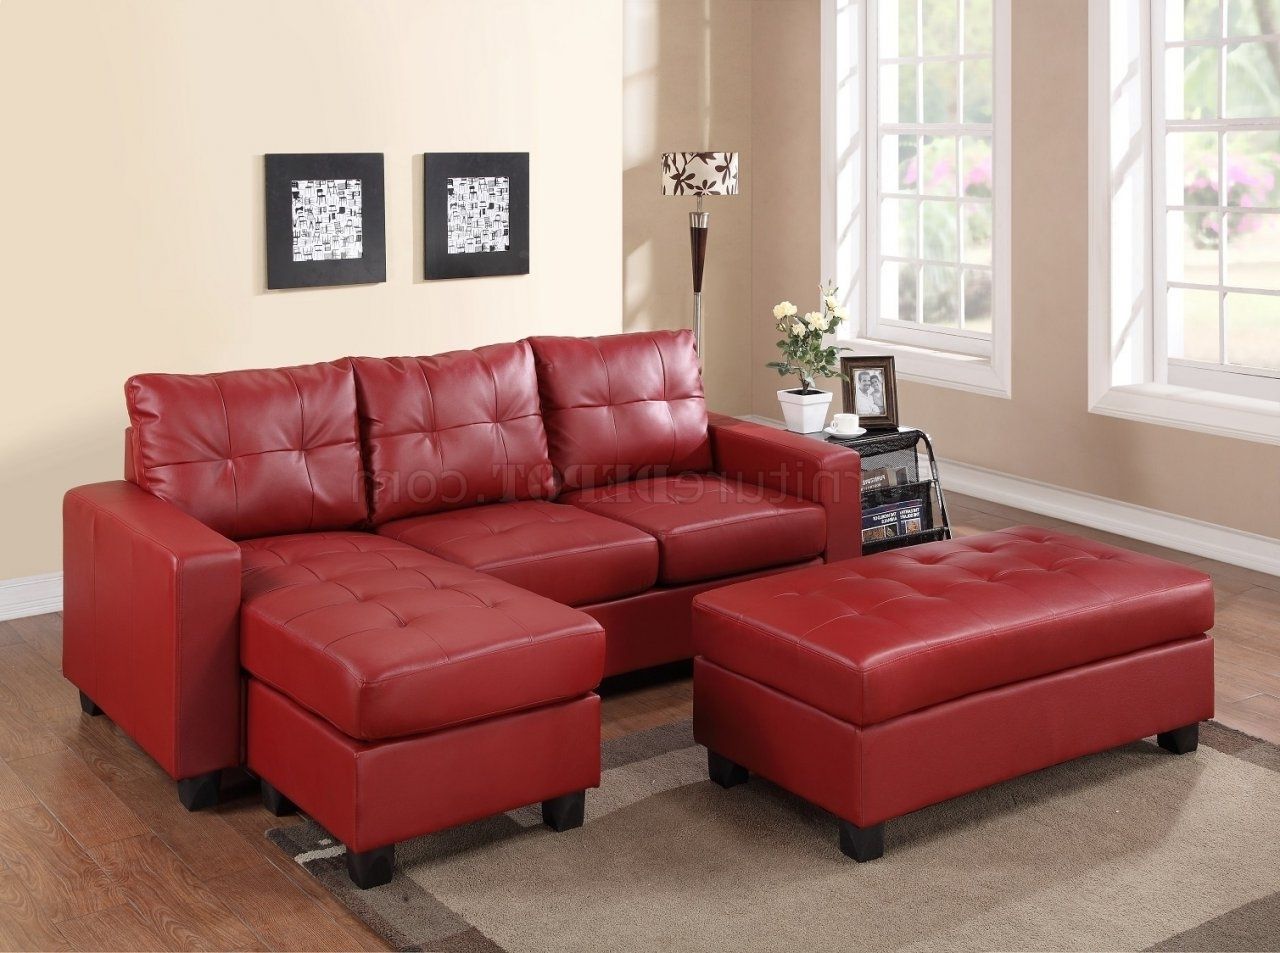 Preferred Michigan Sectional Sofas With 2511 Sectional Sofa Set In Red Bonded Leather Match Pu (View 1 of 15)